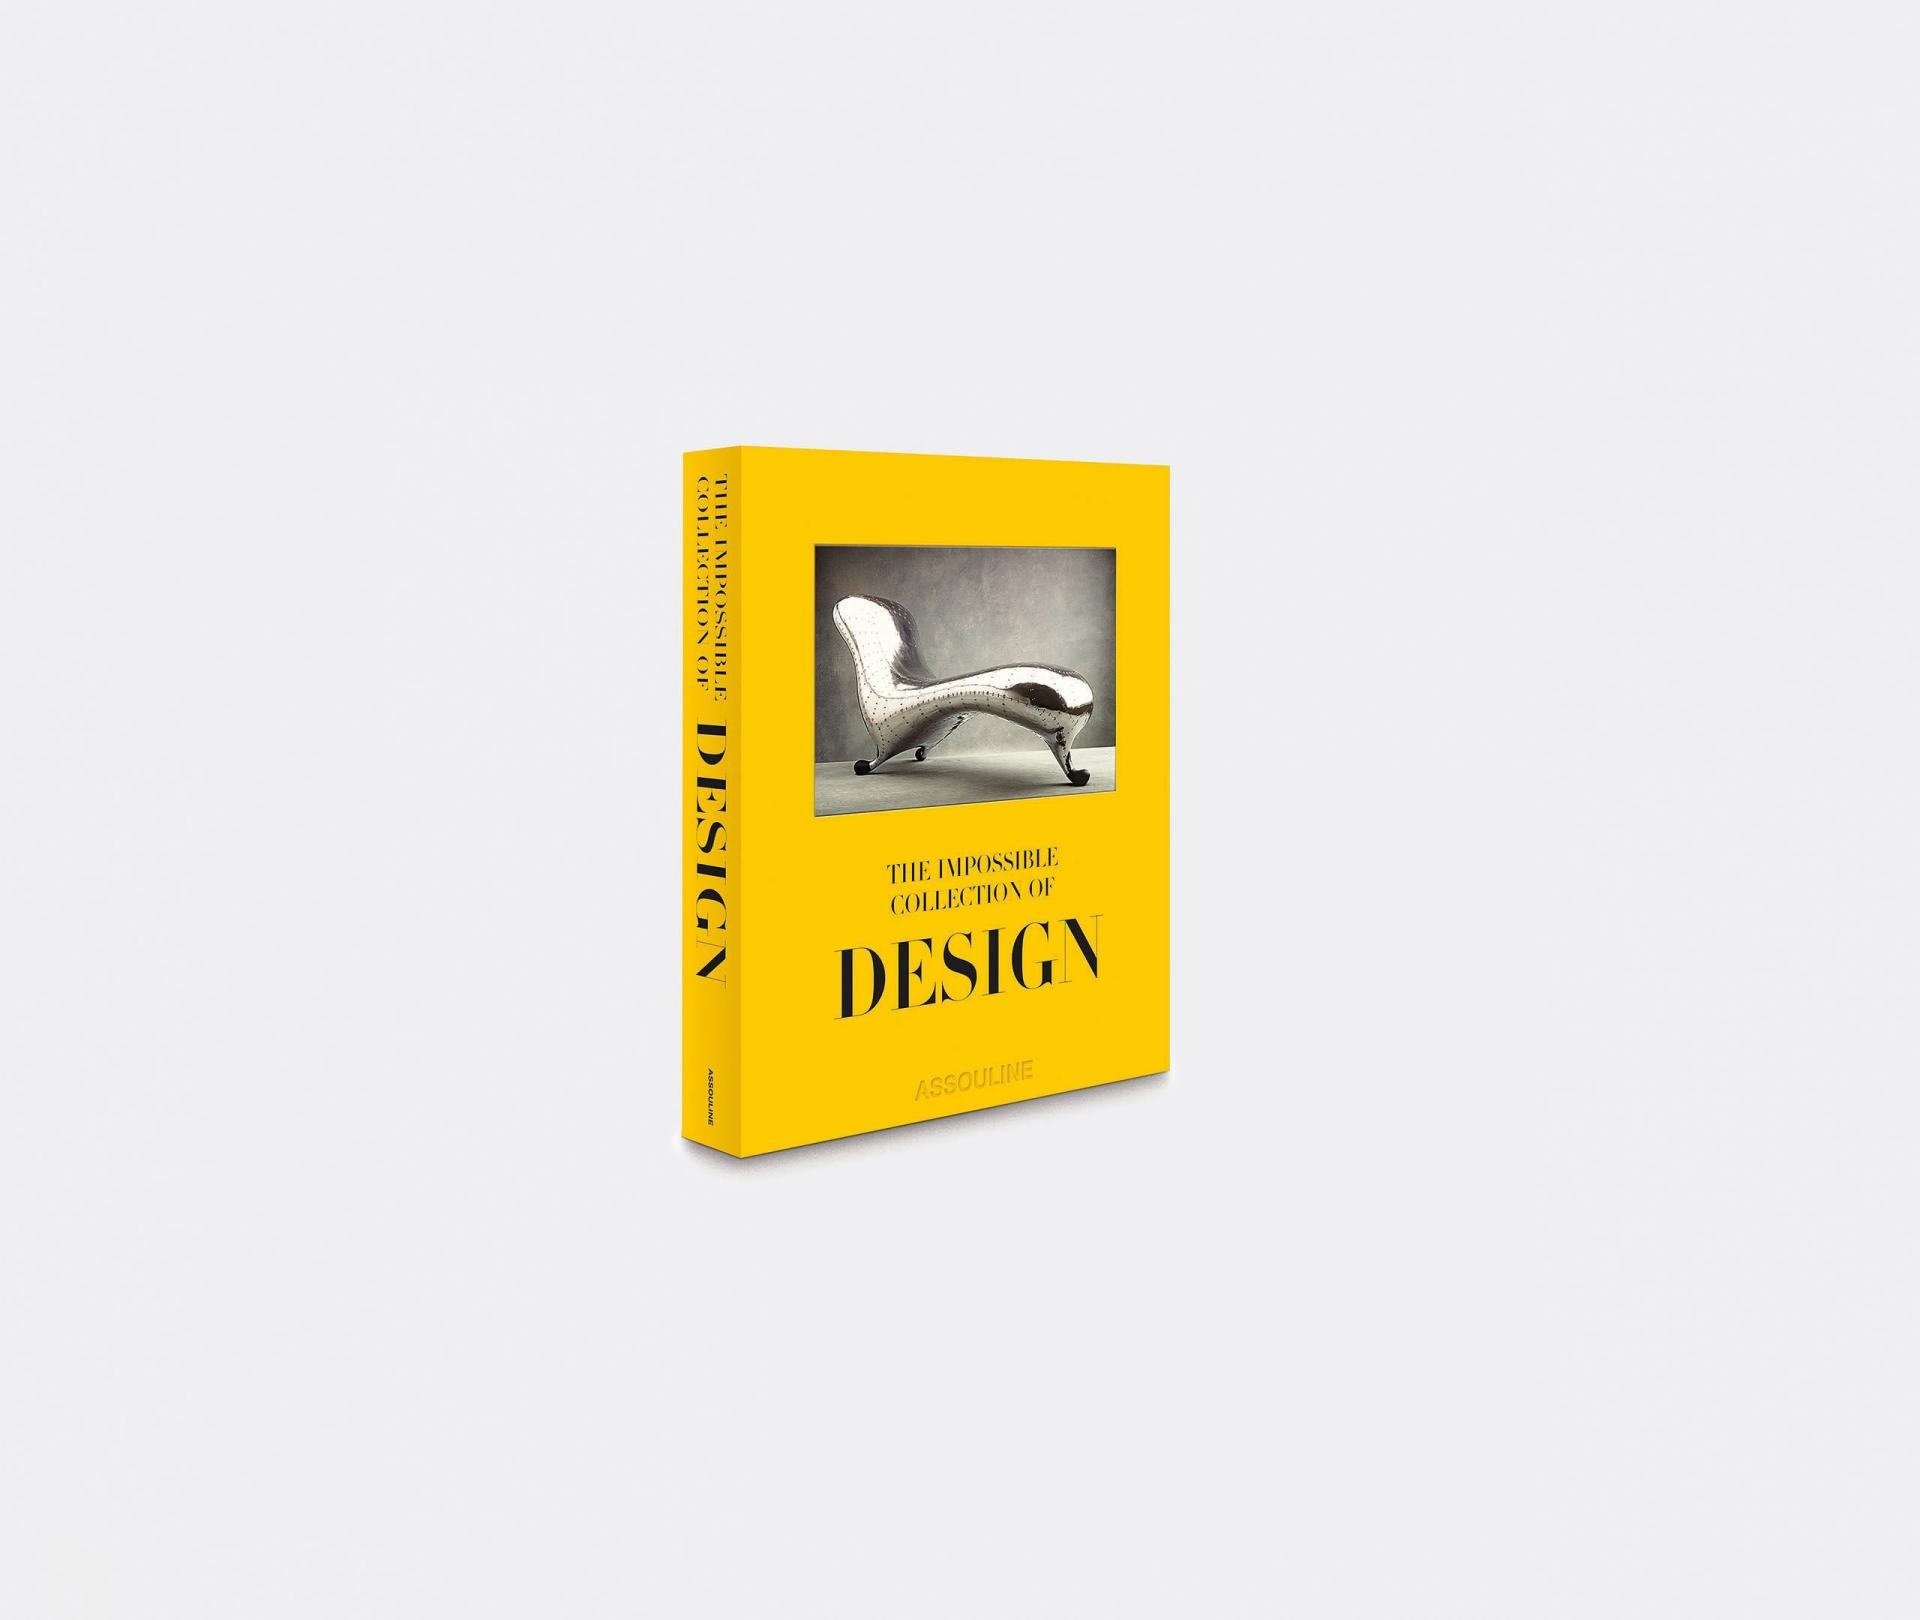 The Impossible Collection of Design book